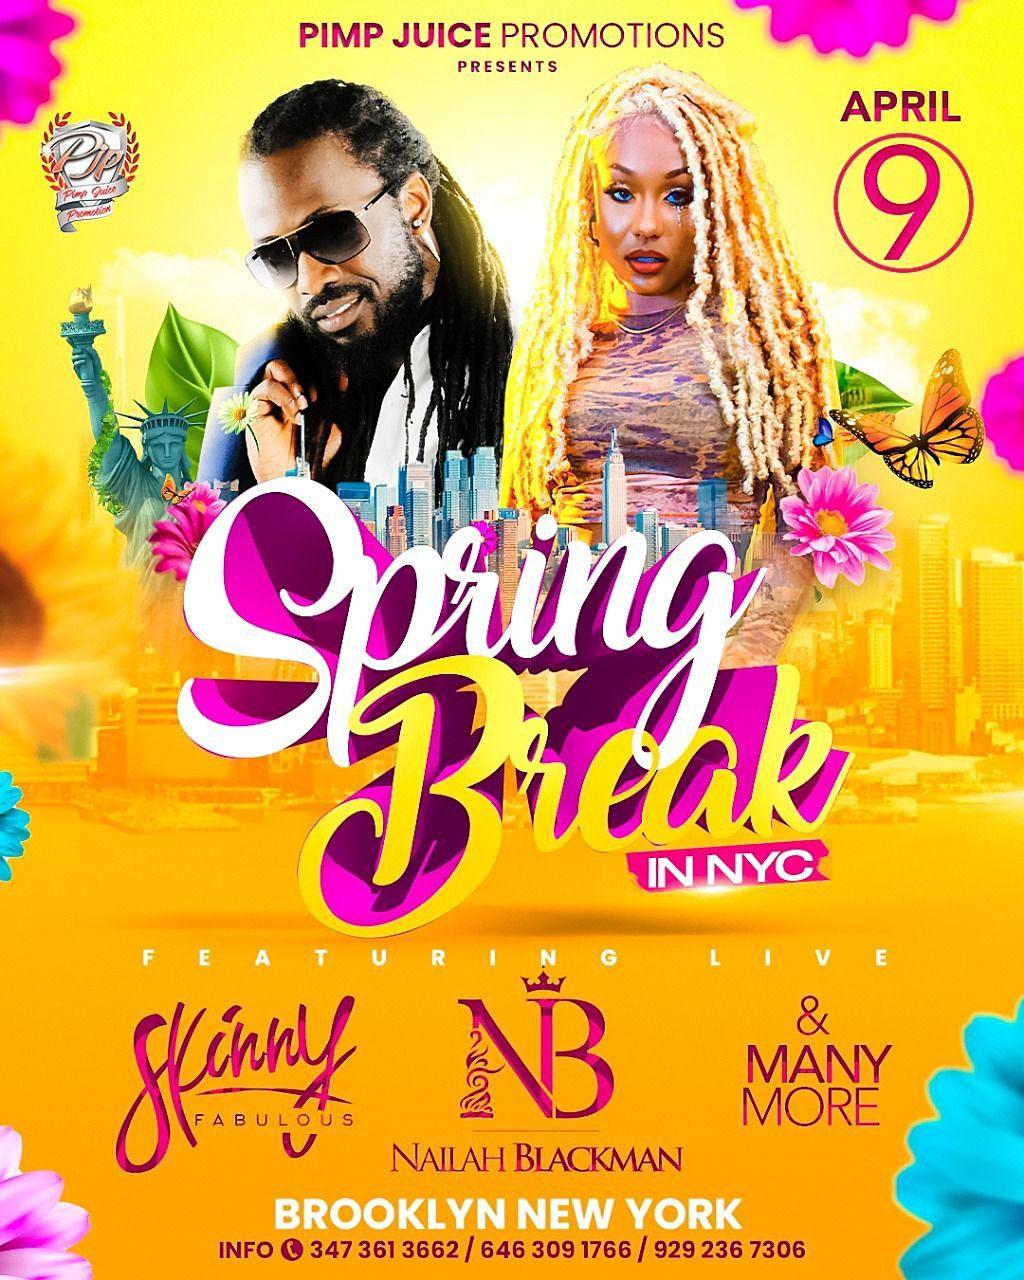 PIMPJUICE PROMOTIONS PRESENT SPRING BREAK IN NYC